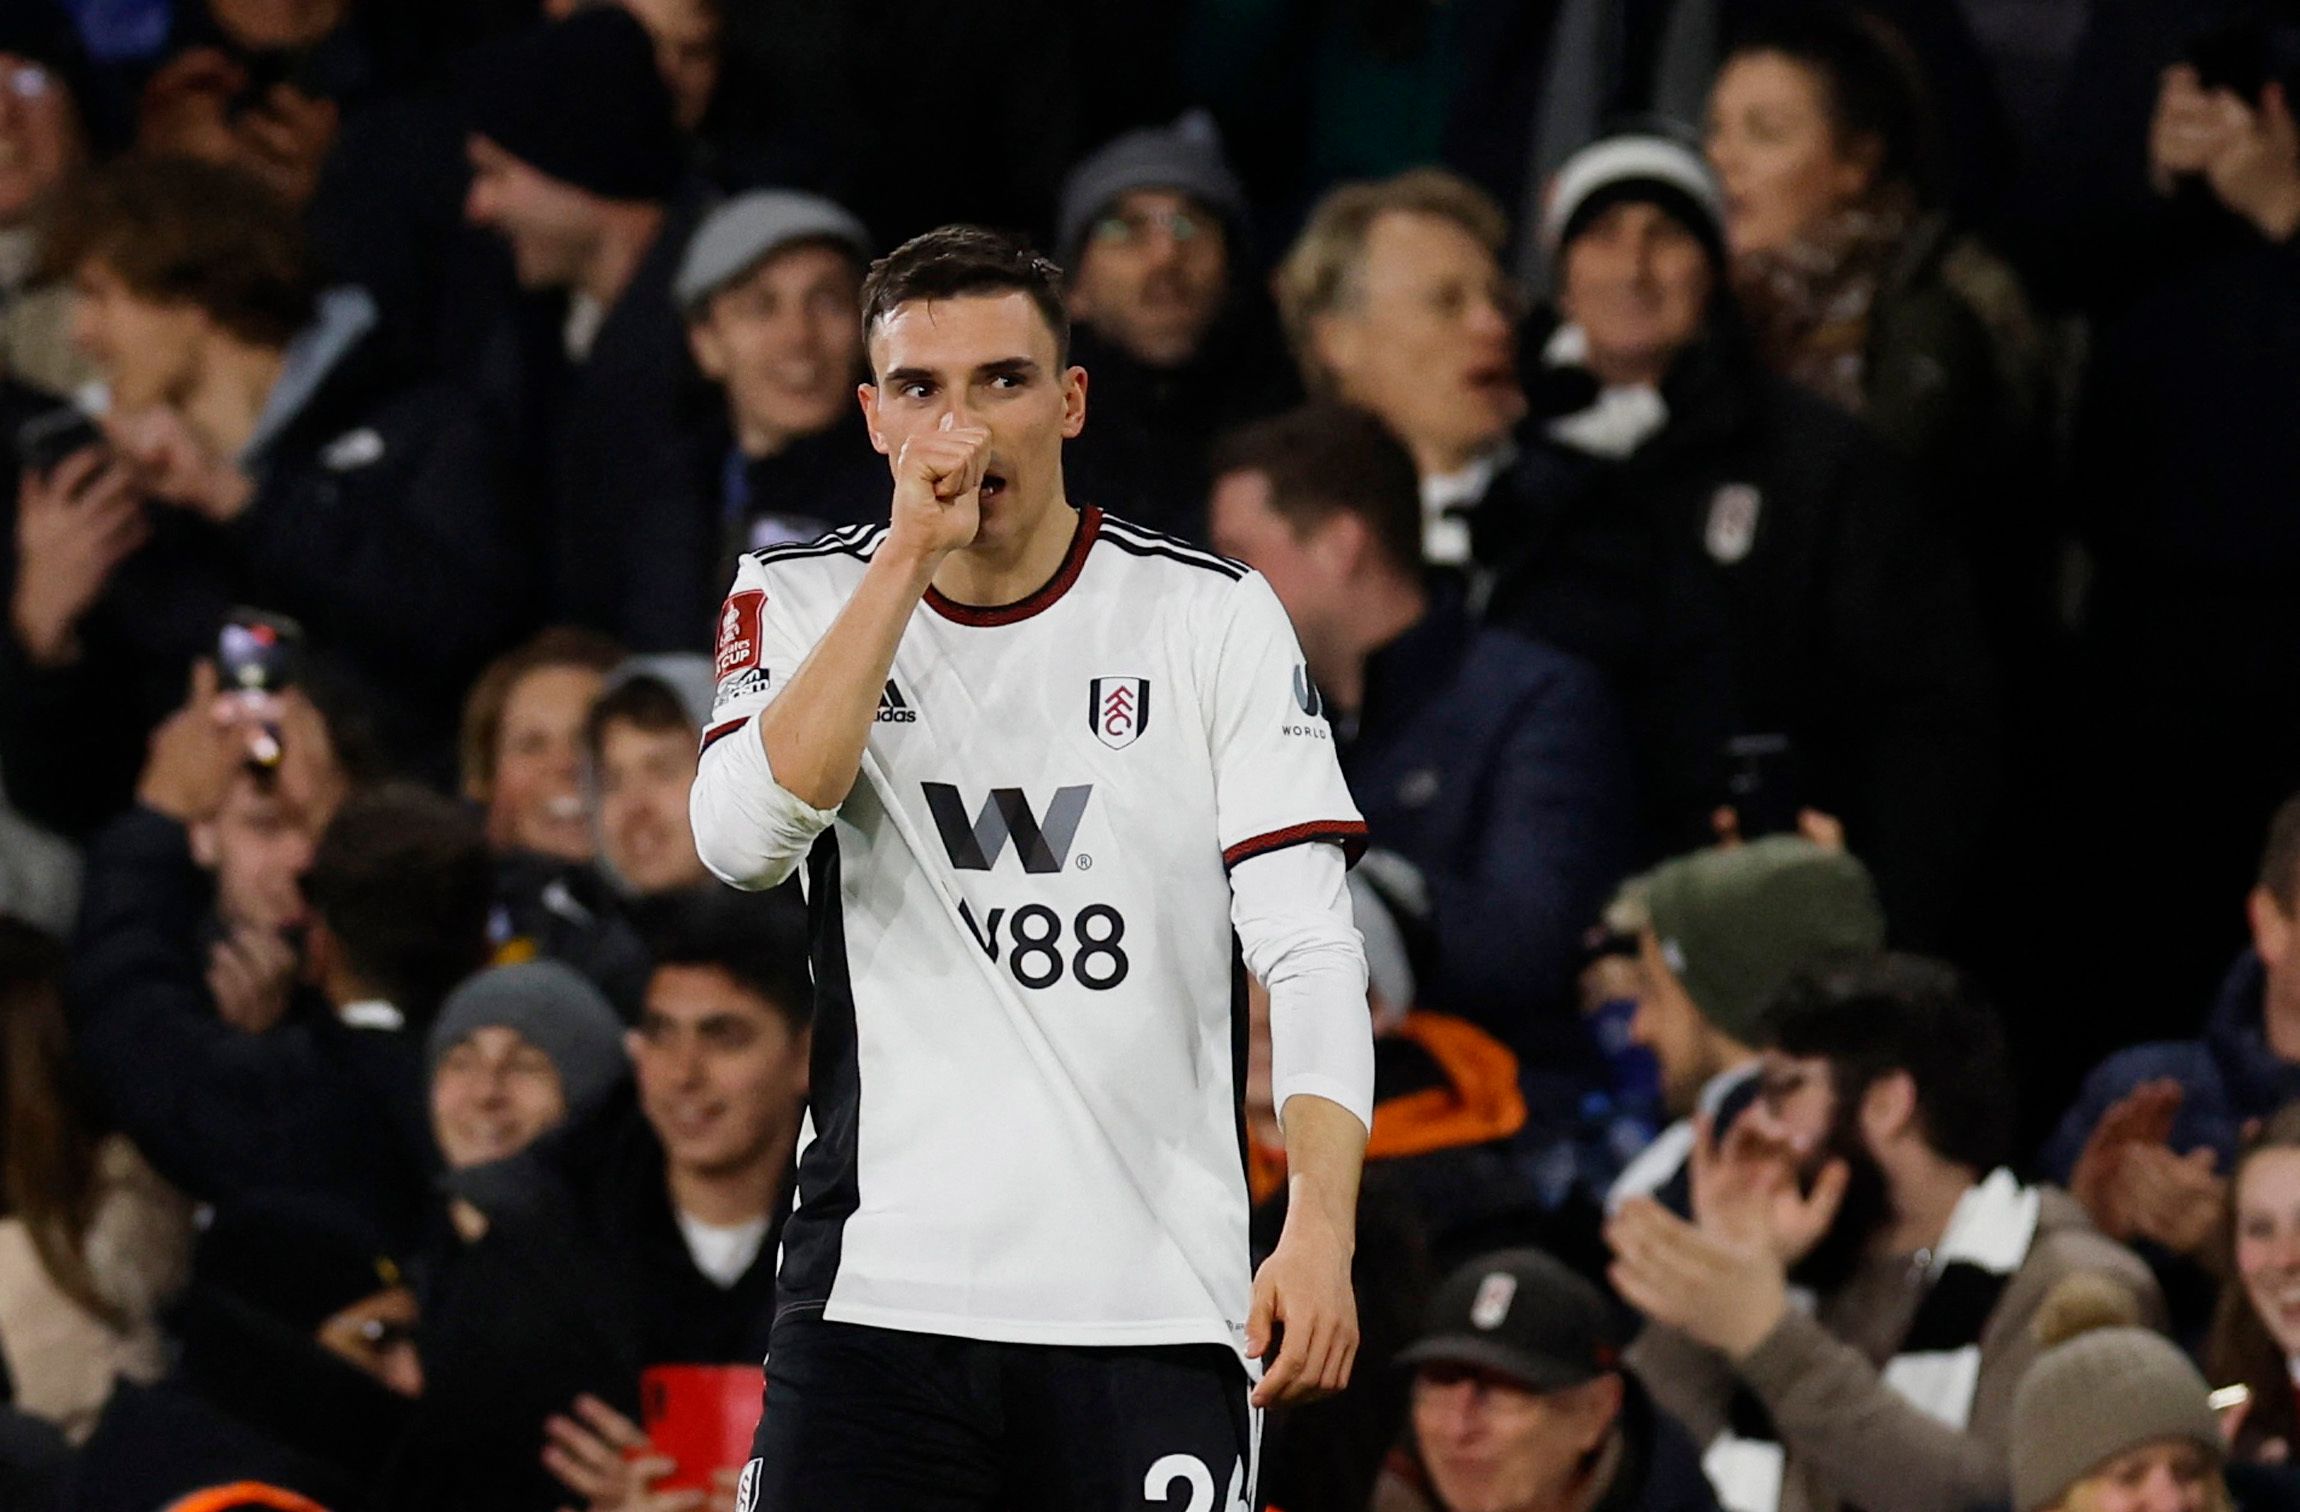 Soccer Football - FA Cup - Fifth Round - Fulham v Leeds United - Craven Cottage, London, Britain - February 28, 2023 Fulham's Joao Palhinha celebrates scoring their first goal Action Images via Reuters/Andrew Couldridge